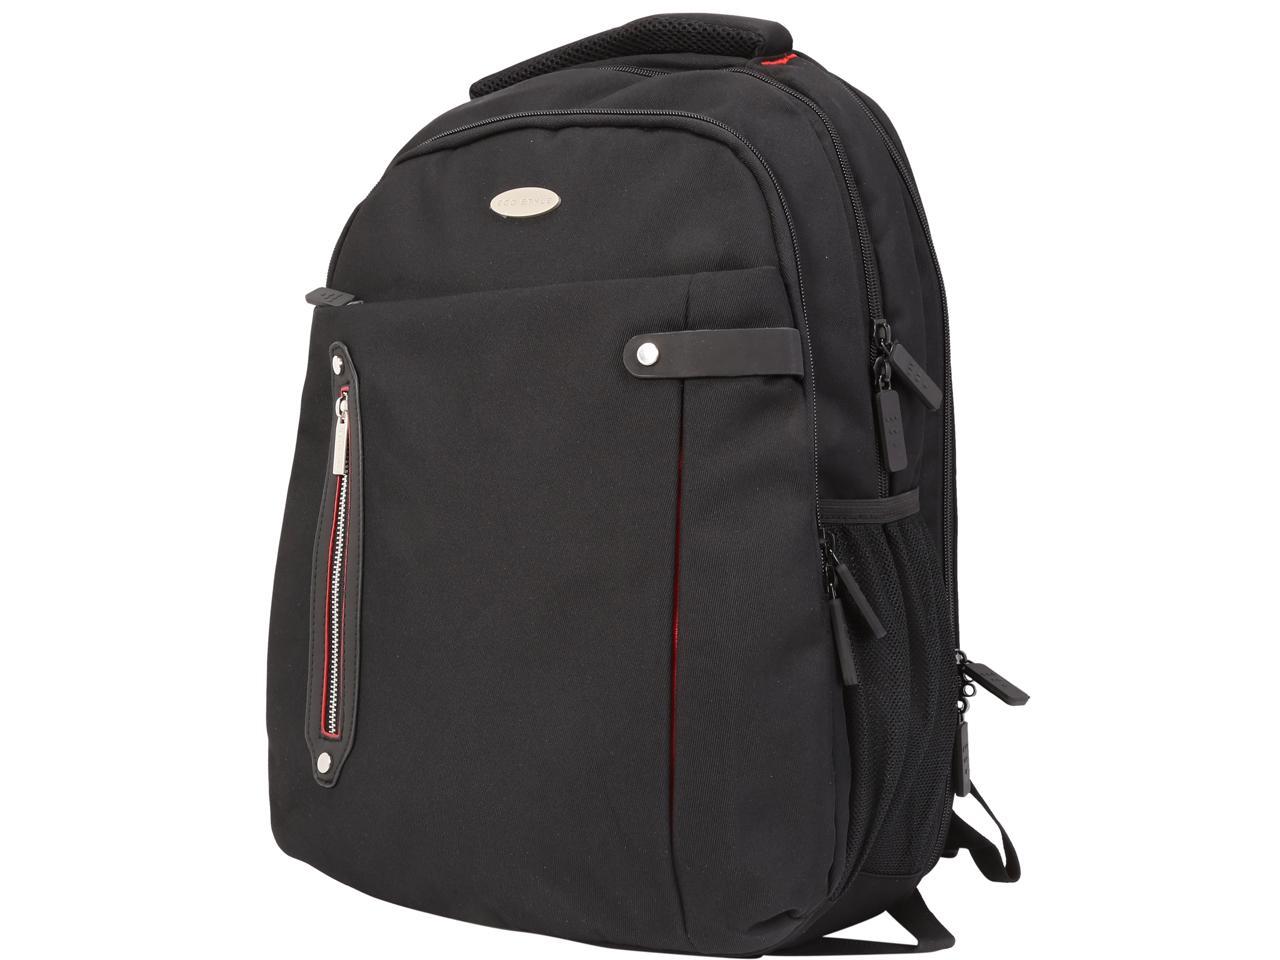 Eco Style Black Pro Backpack-Checkpoint Friendly Model ETPR-BP16-CF | eBay